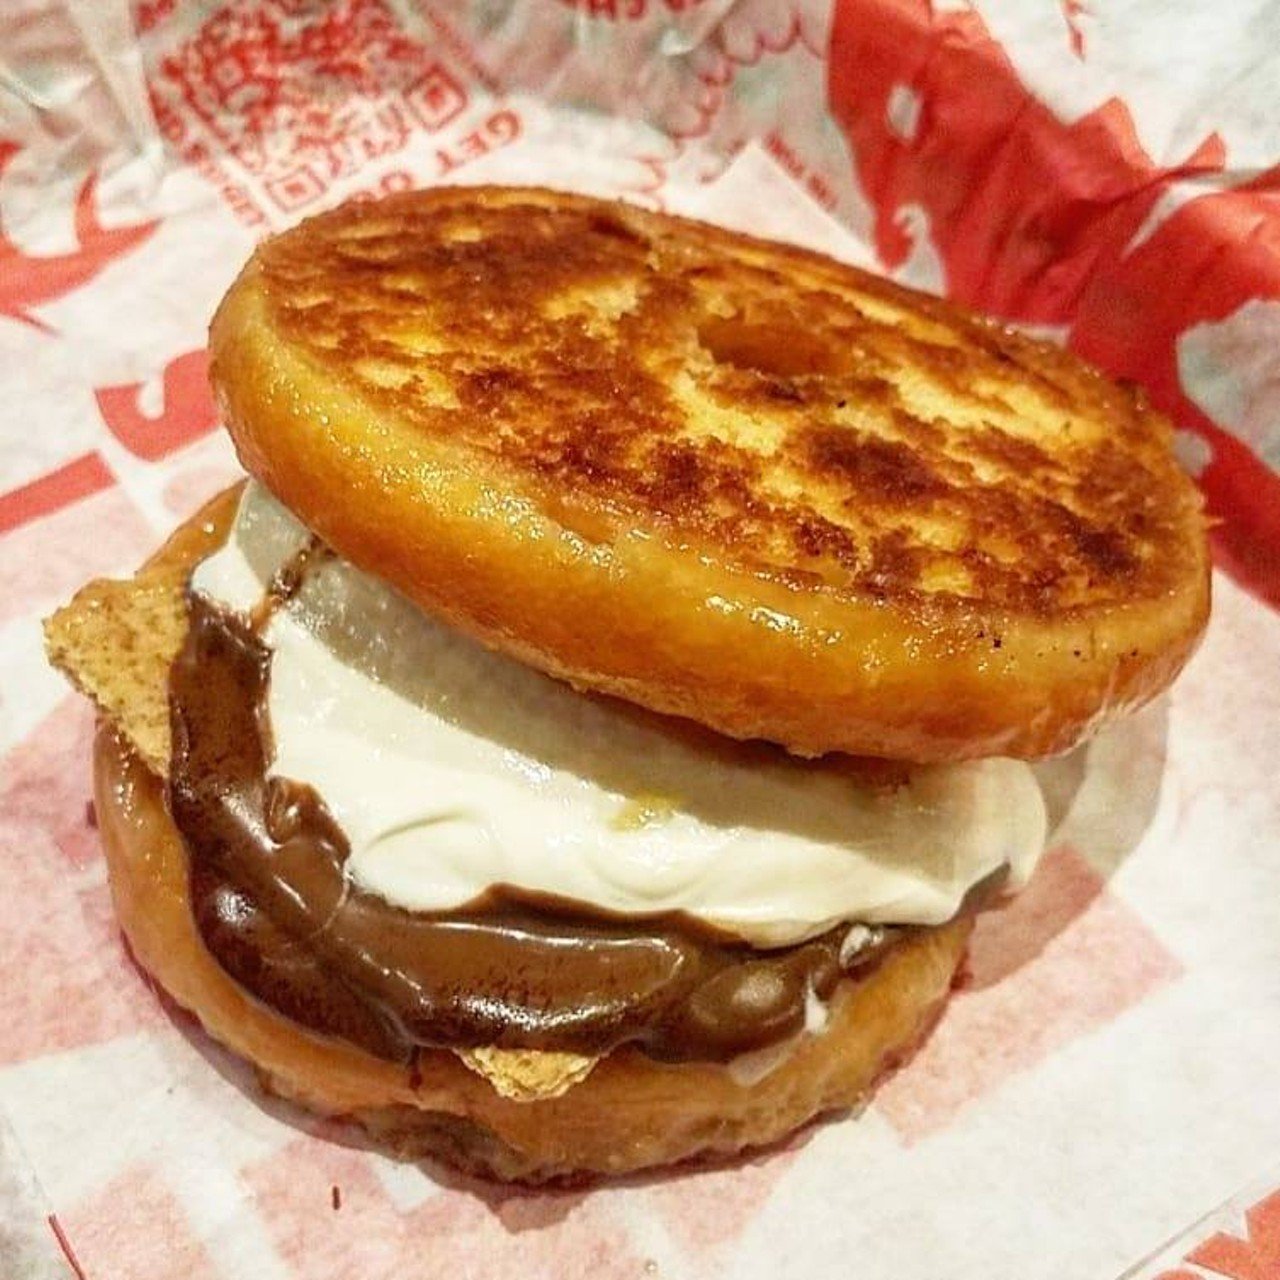 Tom & Chee
Multiple locations including 125 E. Court St., Downtown
Tom & Chee is a well-loved grilled cheese staple, but one of its most indulgent items from the chain is on its dessert menu. Their famous Grilled Chee Donut is a classic glazed donut that has been grilled and stuffed with mild cheddar cheese, offering the perfect combination of sweet and savory in one bite.